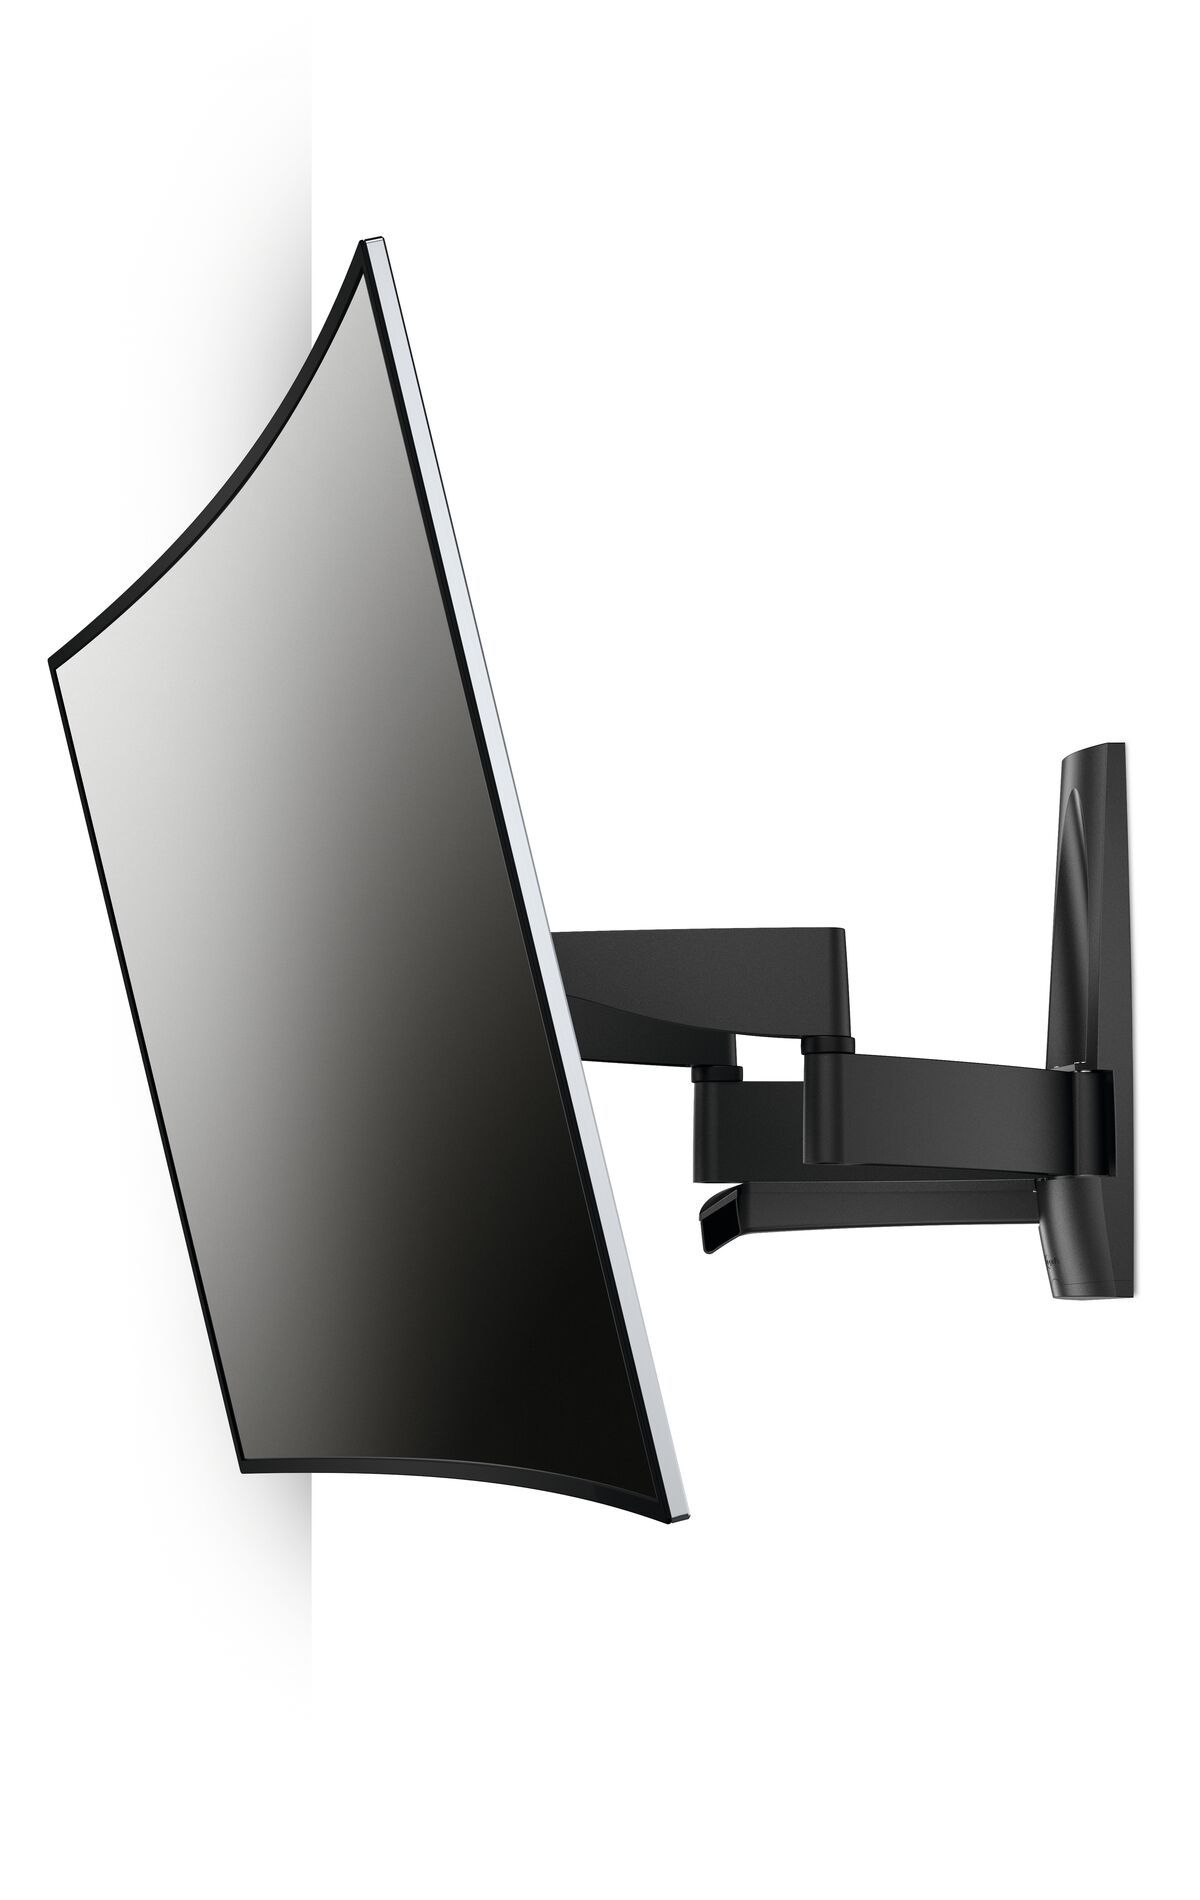 Vogel's WALL 2450 Full-Motion TV Wall Mount - Suitable for 55 up to 100 inch TVs - Motion (up to 120°) - Tilt up to 15° - White wall